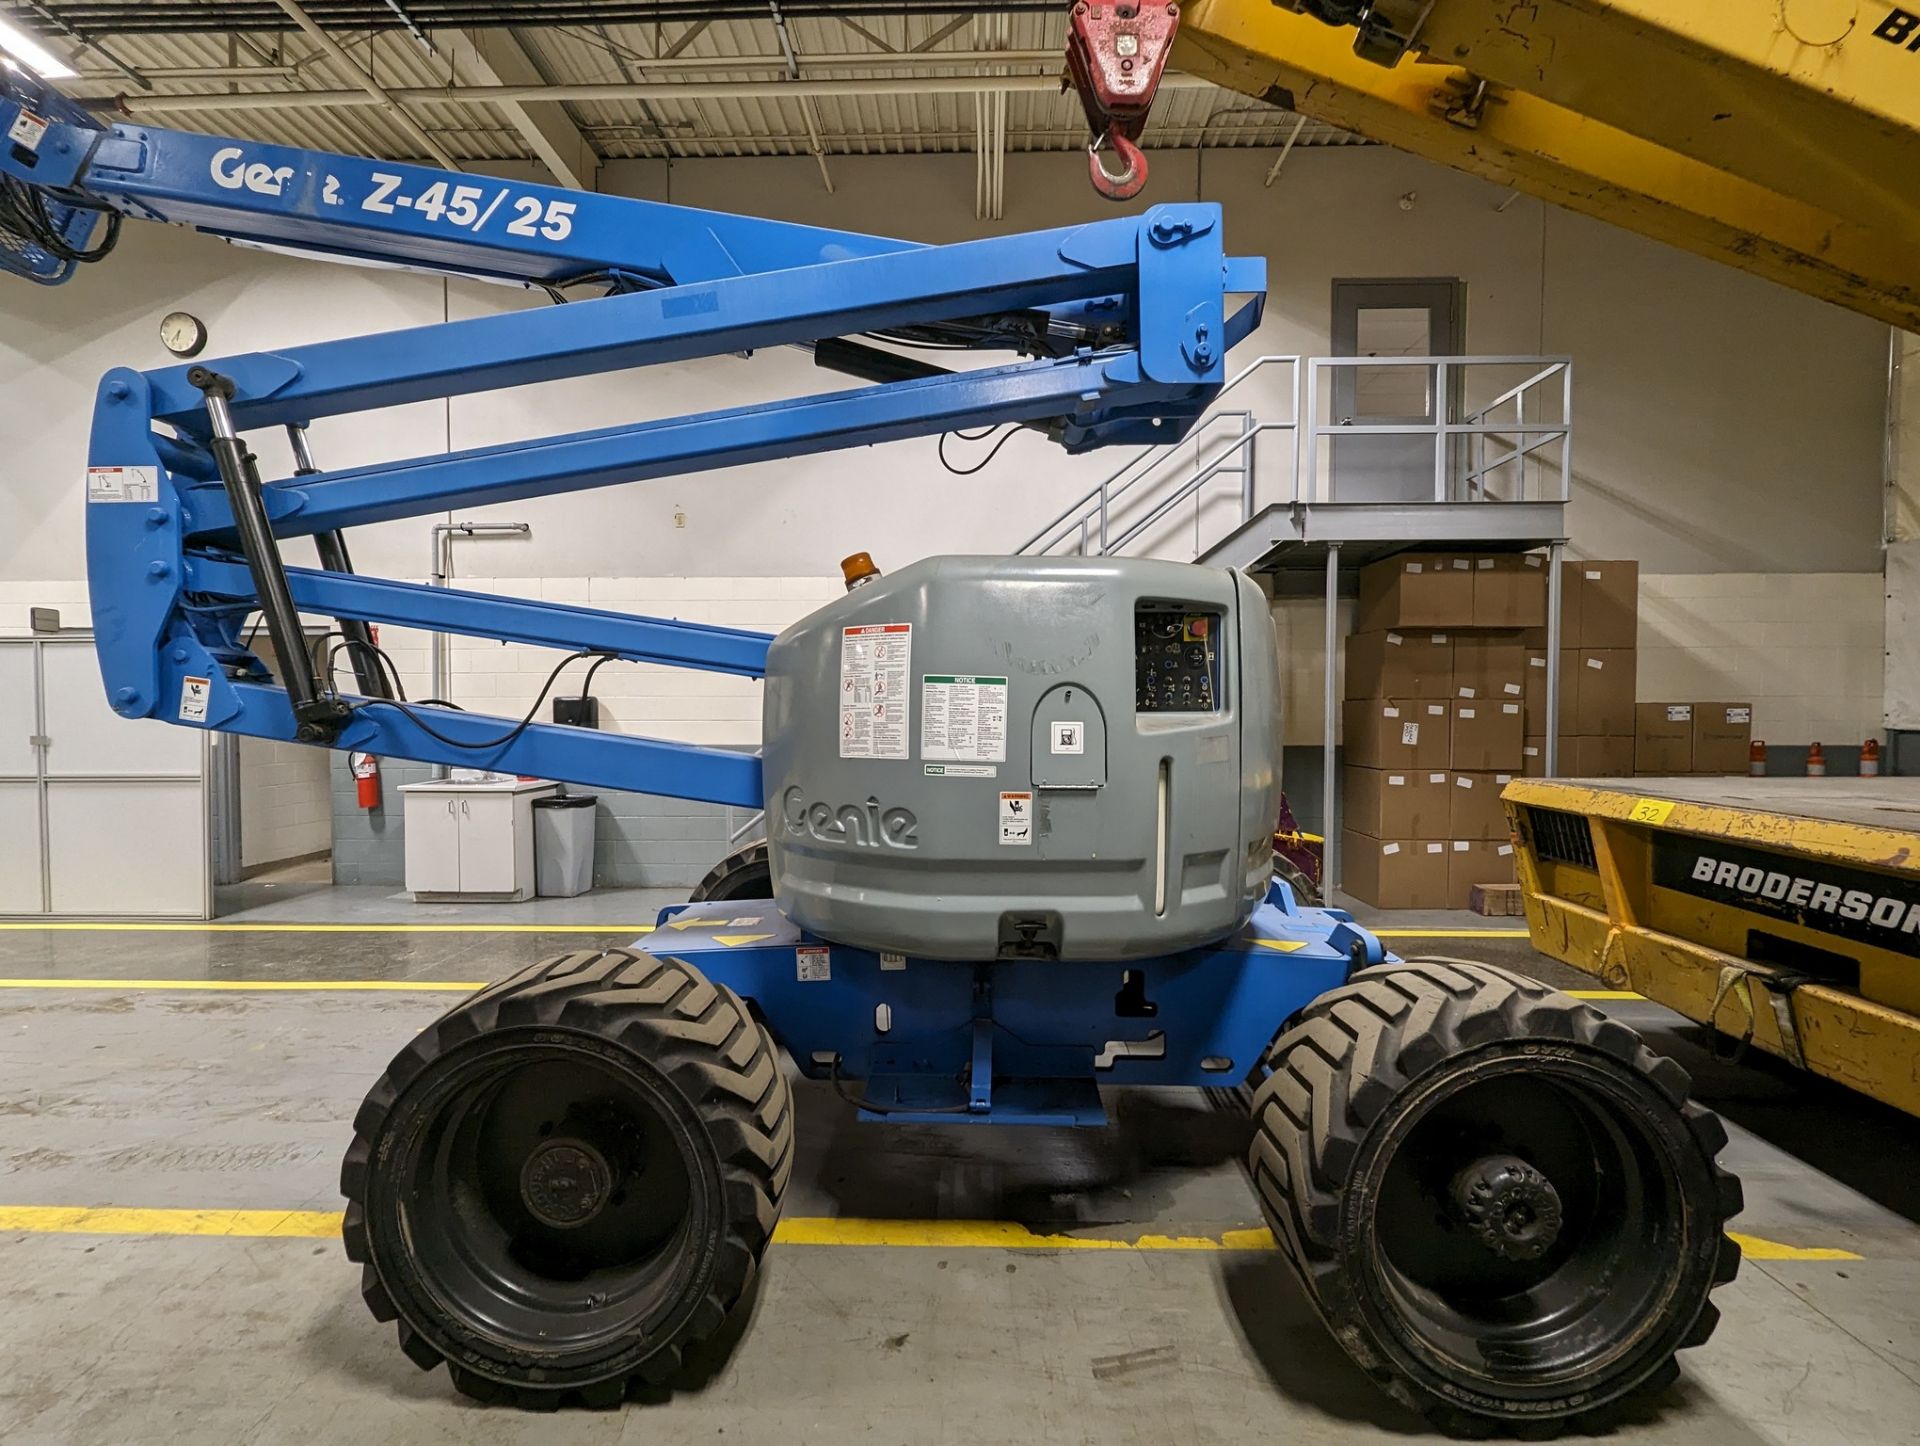 2005 GENIE Z-45/25 ARTICULATED BOOM, GAS POWERED, 4X4, 45'-8" MAX WORKING HEIGHT, 24’-6" MAX - Image 18 of 23